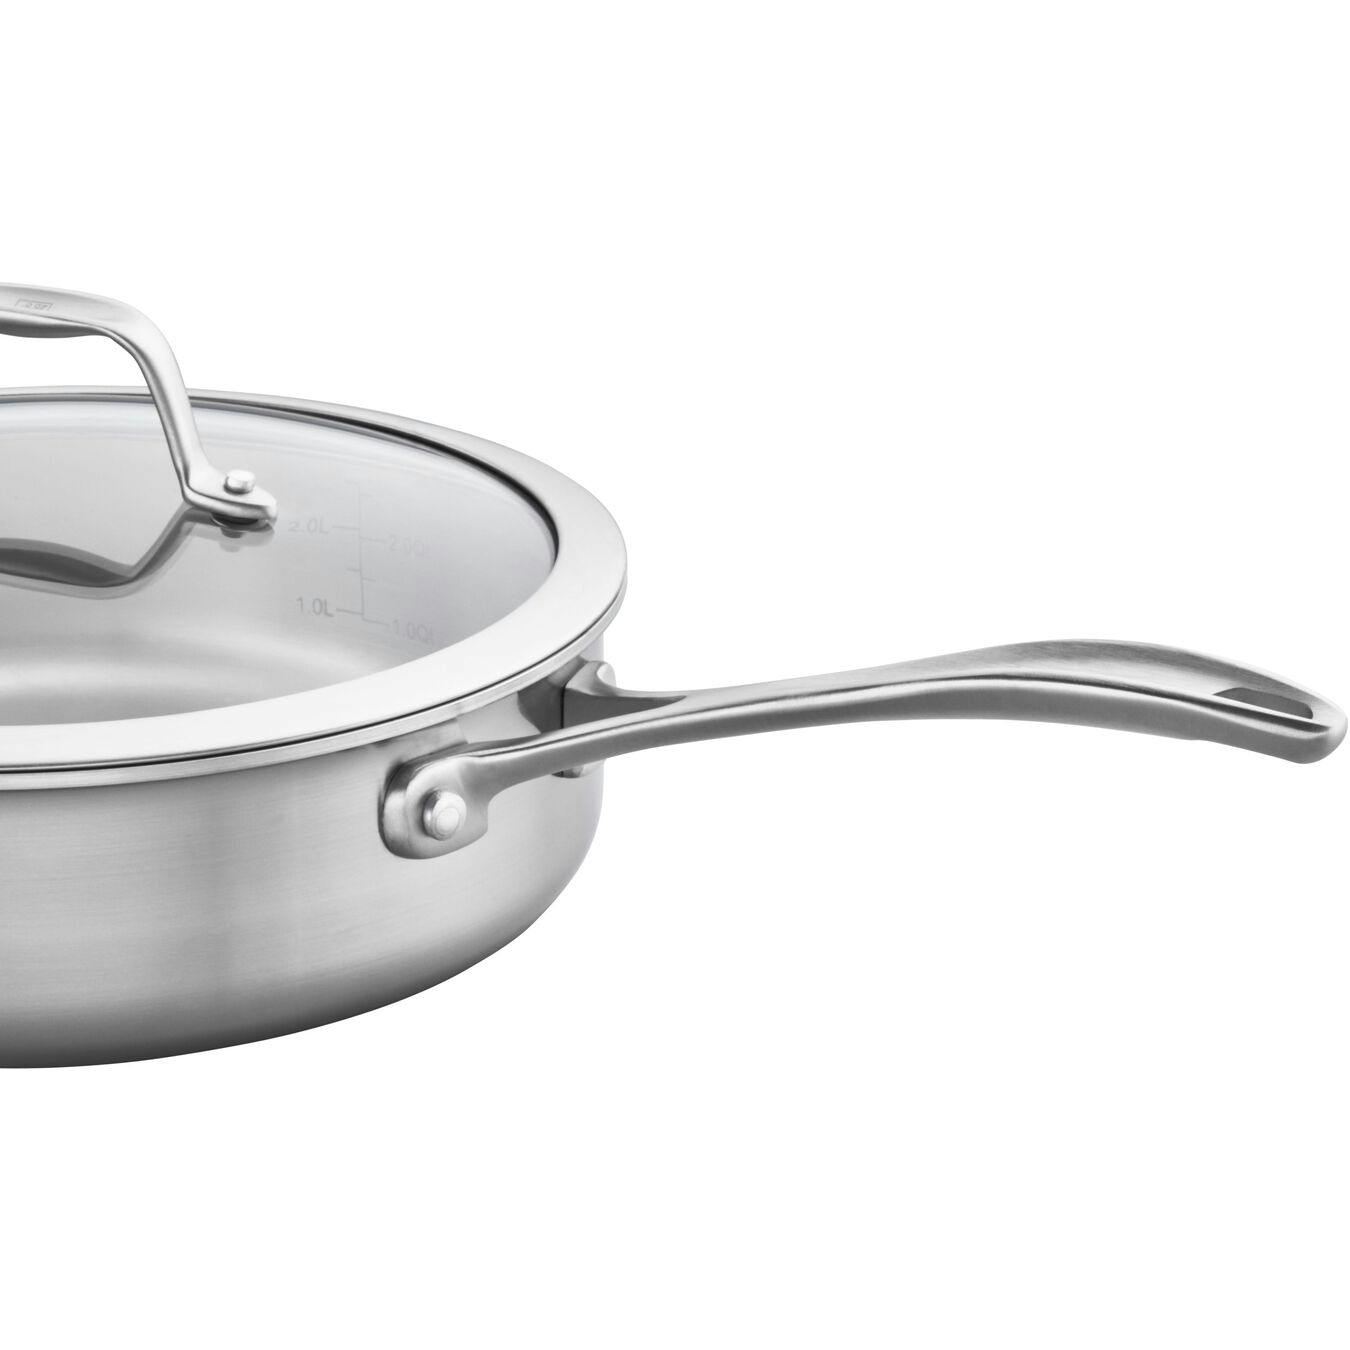 Zwilling Spirit 3-Ply 3-QT Stainless Steel Saute Pan